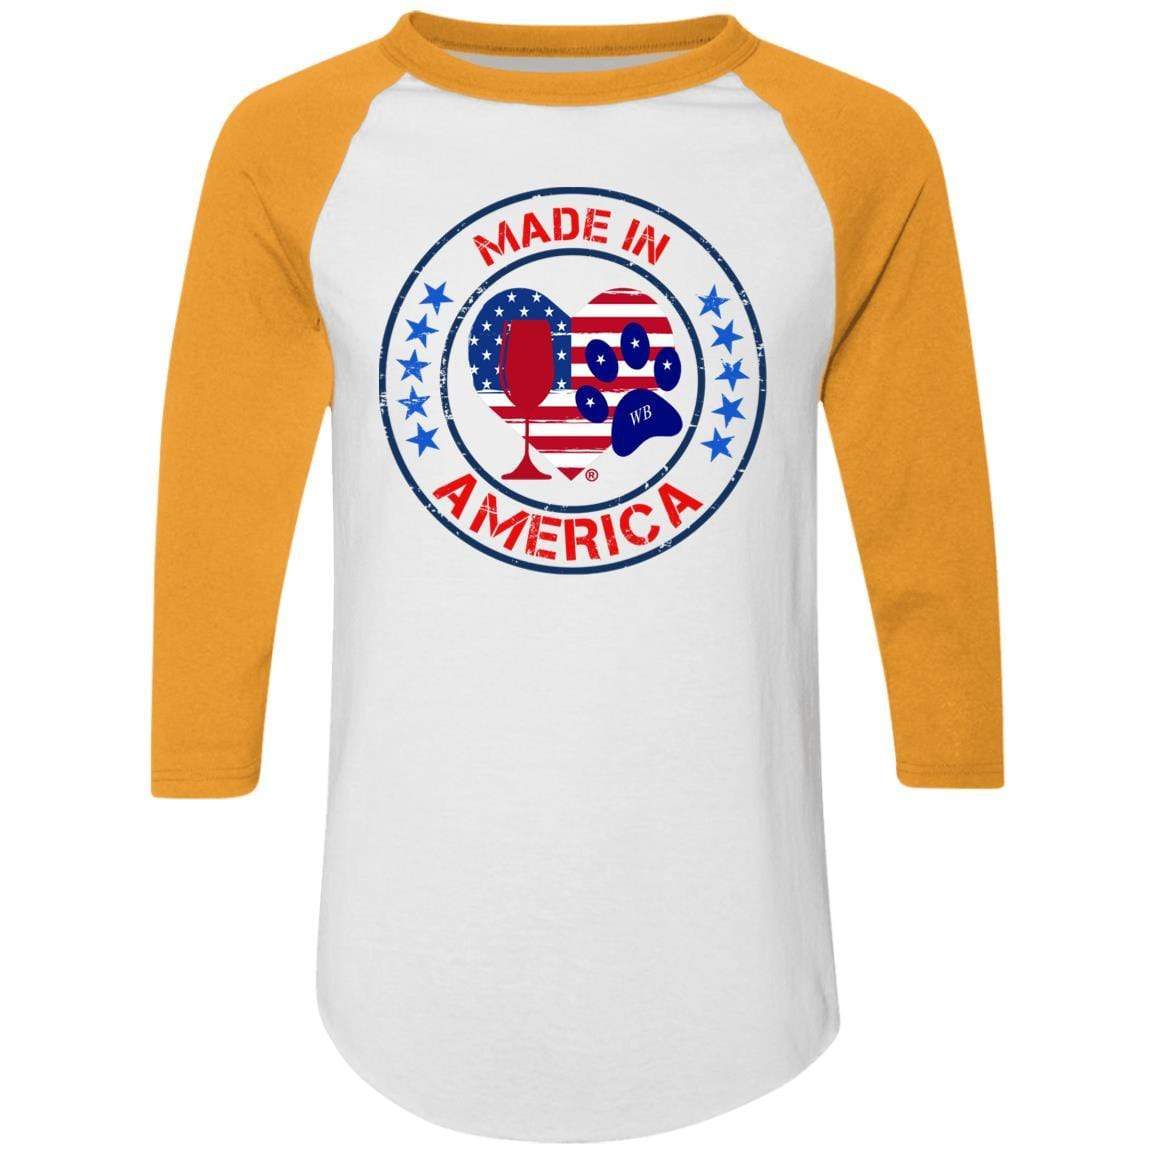 T-Shirts White/Gold / S Winey Bitches Co "Made In America" Colorblock Raglan Jersey WineyBitchesCo